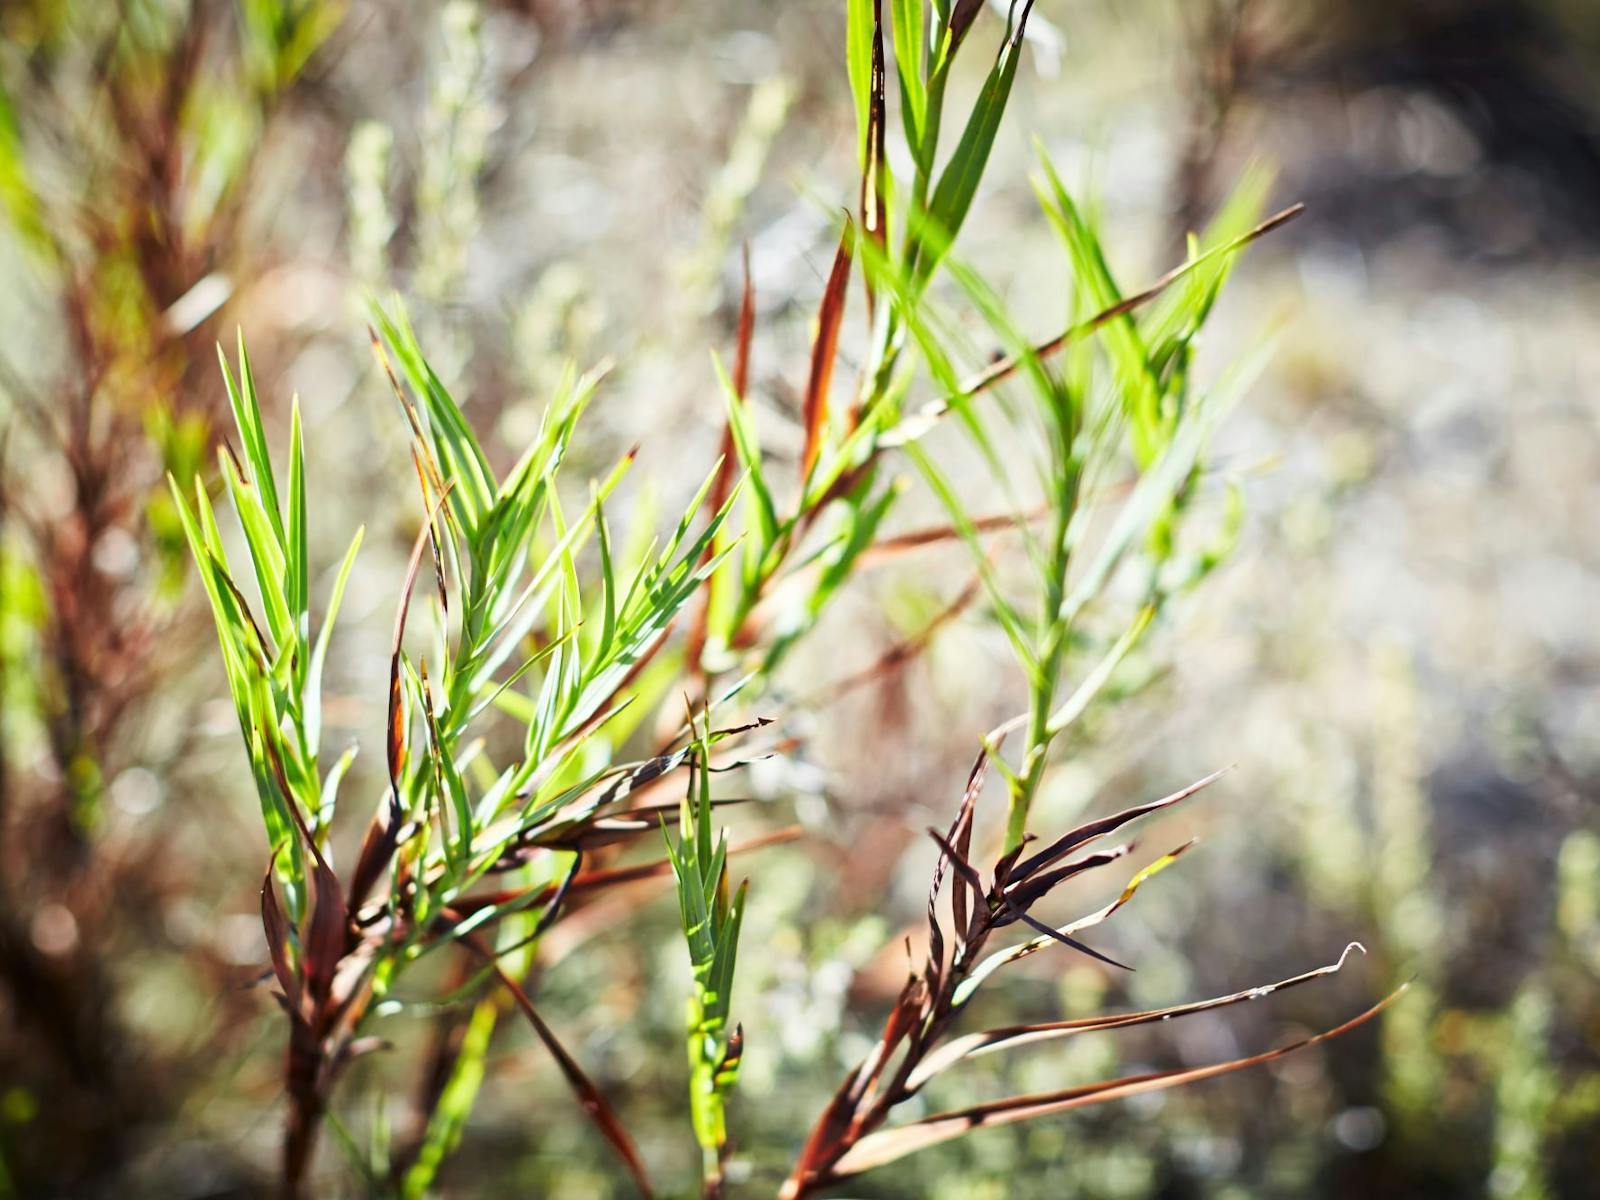 Native plant with bright green leaves and brown stems with the sun coming through at sunrise